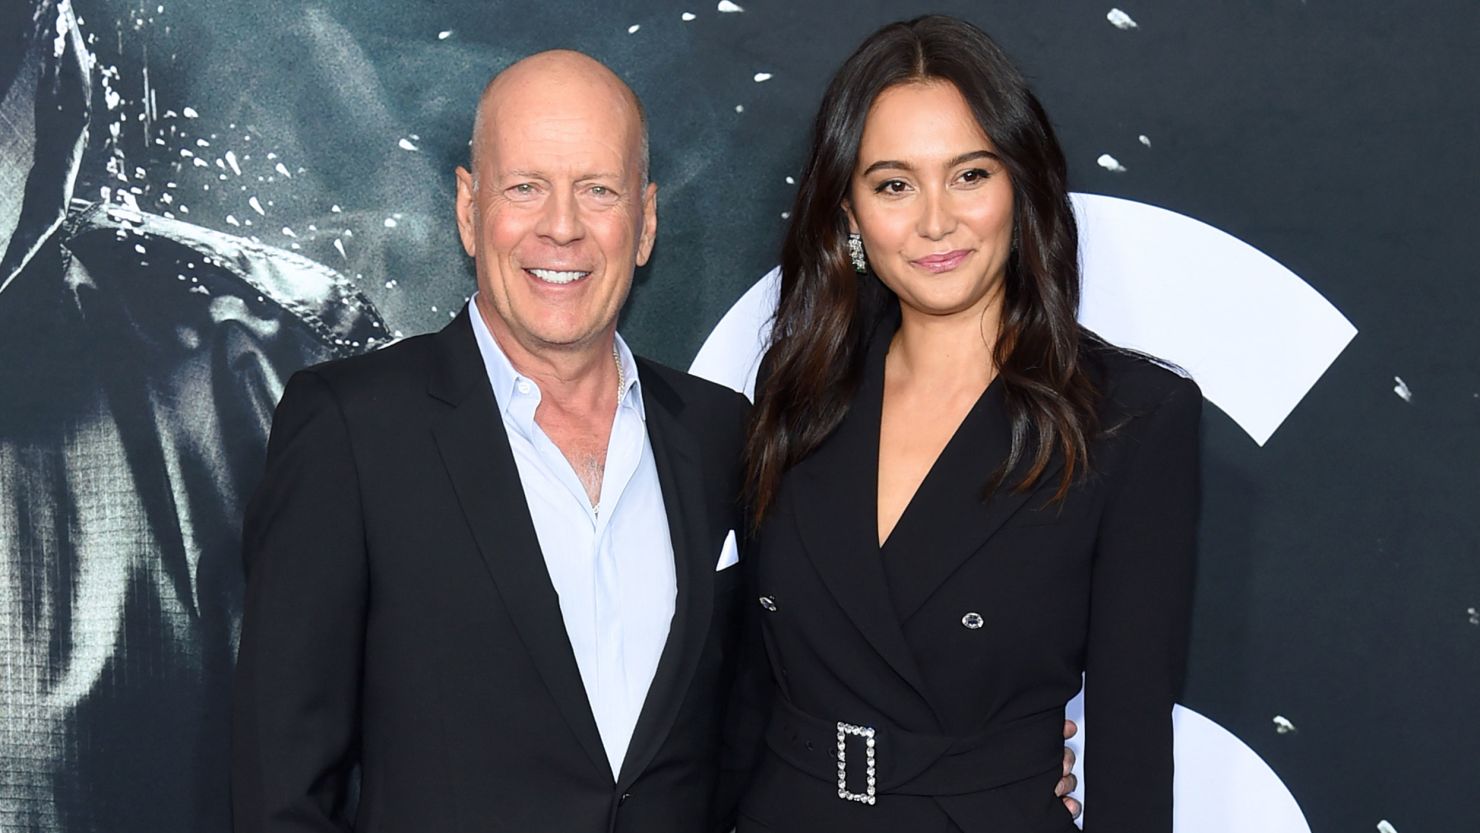 NEW YORK, NY - JANUARY 15:  Bruce Willis and Emma Heming attend the "Glass" New York Premiere at SVA Theater on January 15, 2019 in New York City.  (Photo by Jamie McCarthy/Getty Images)